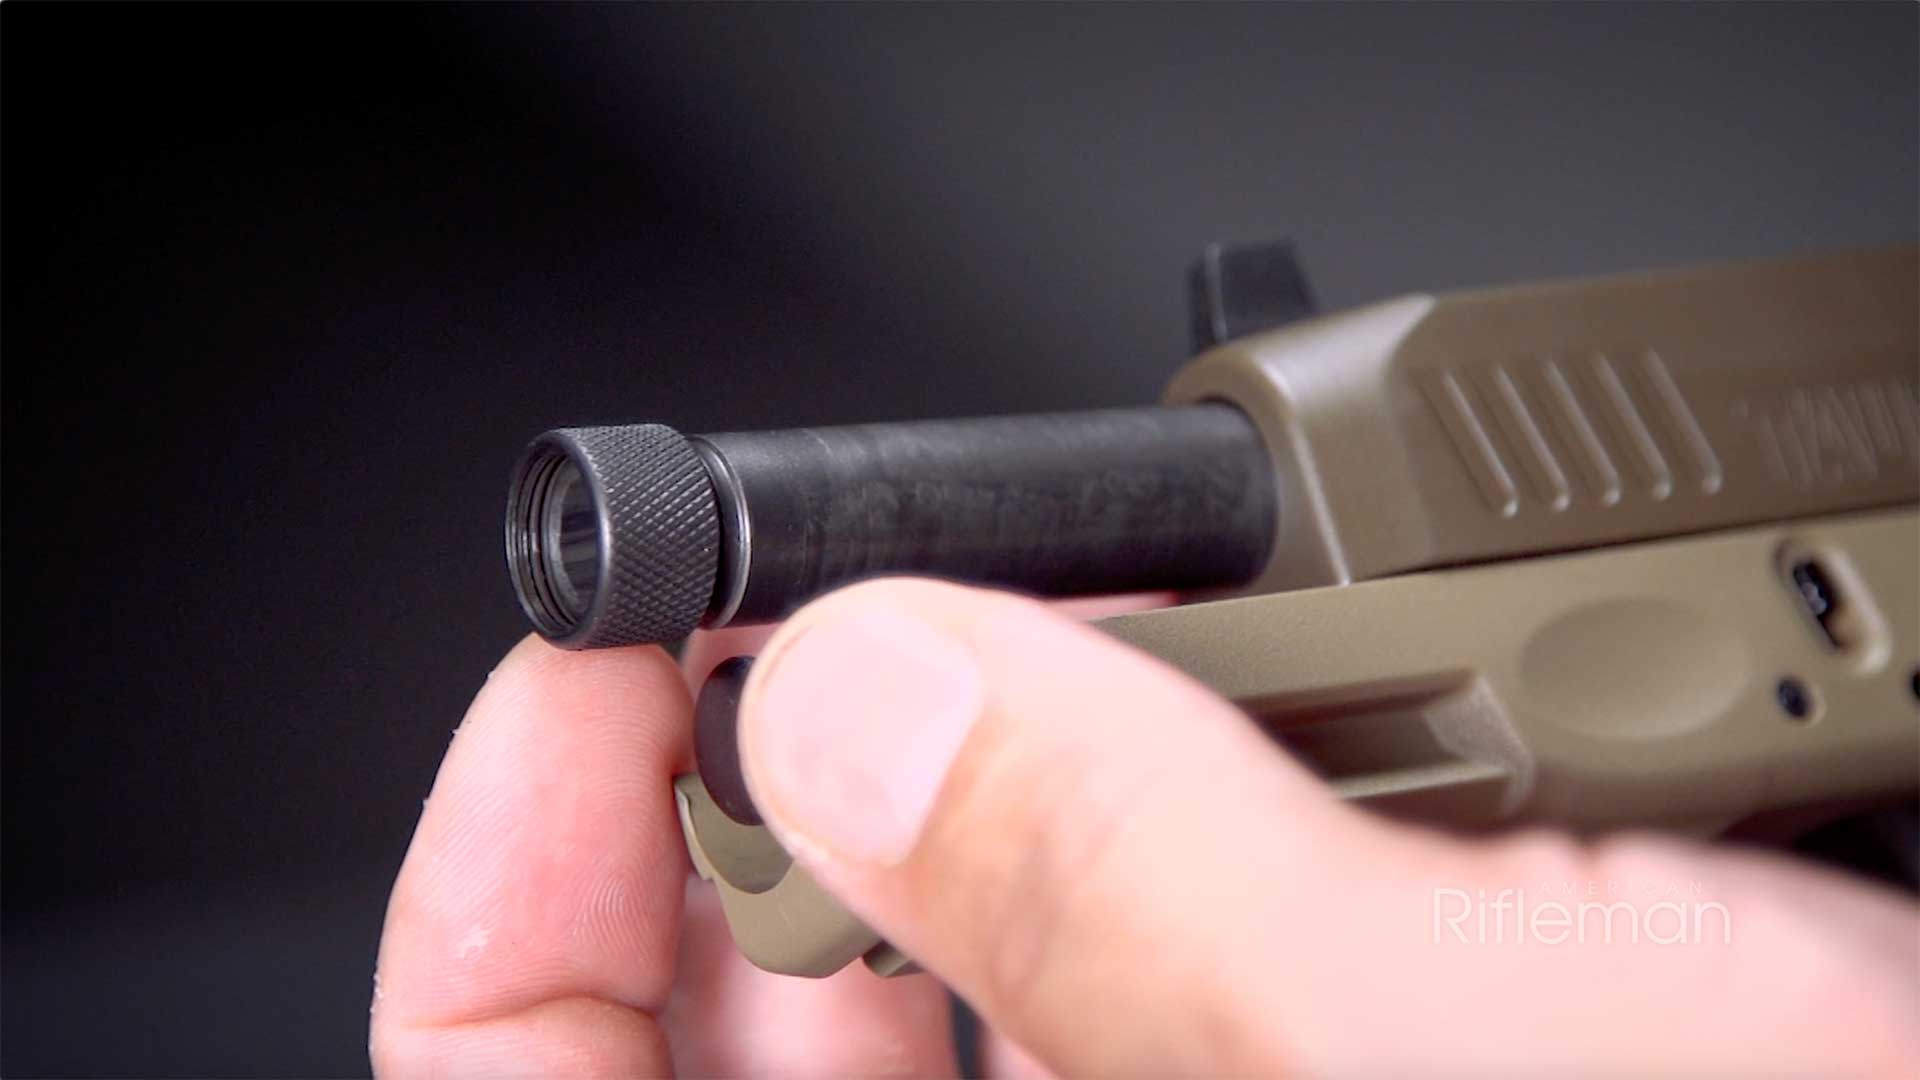 Man unscrewing the thread protector on the Taurus G3 Tactical's threaded muzzle.